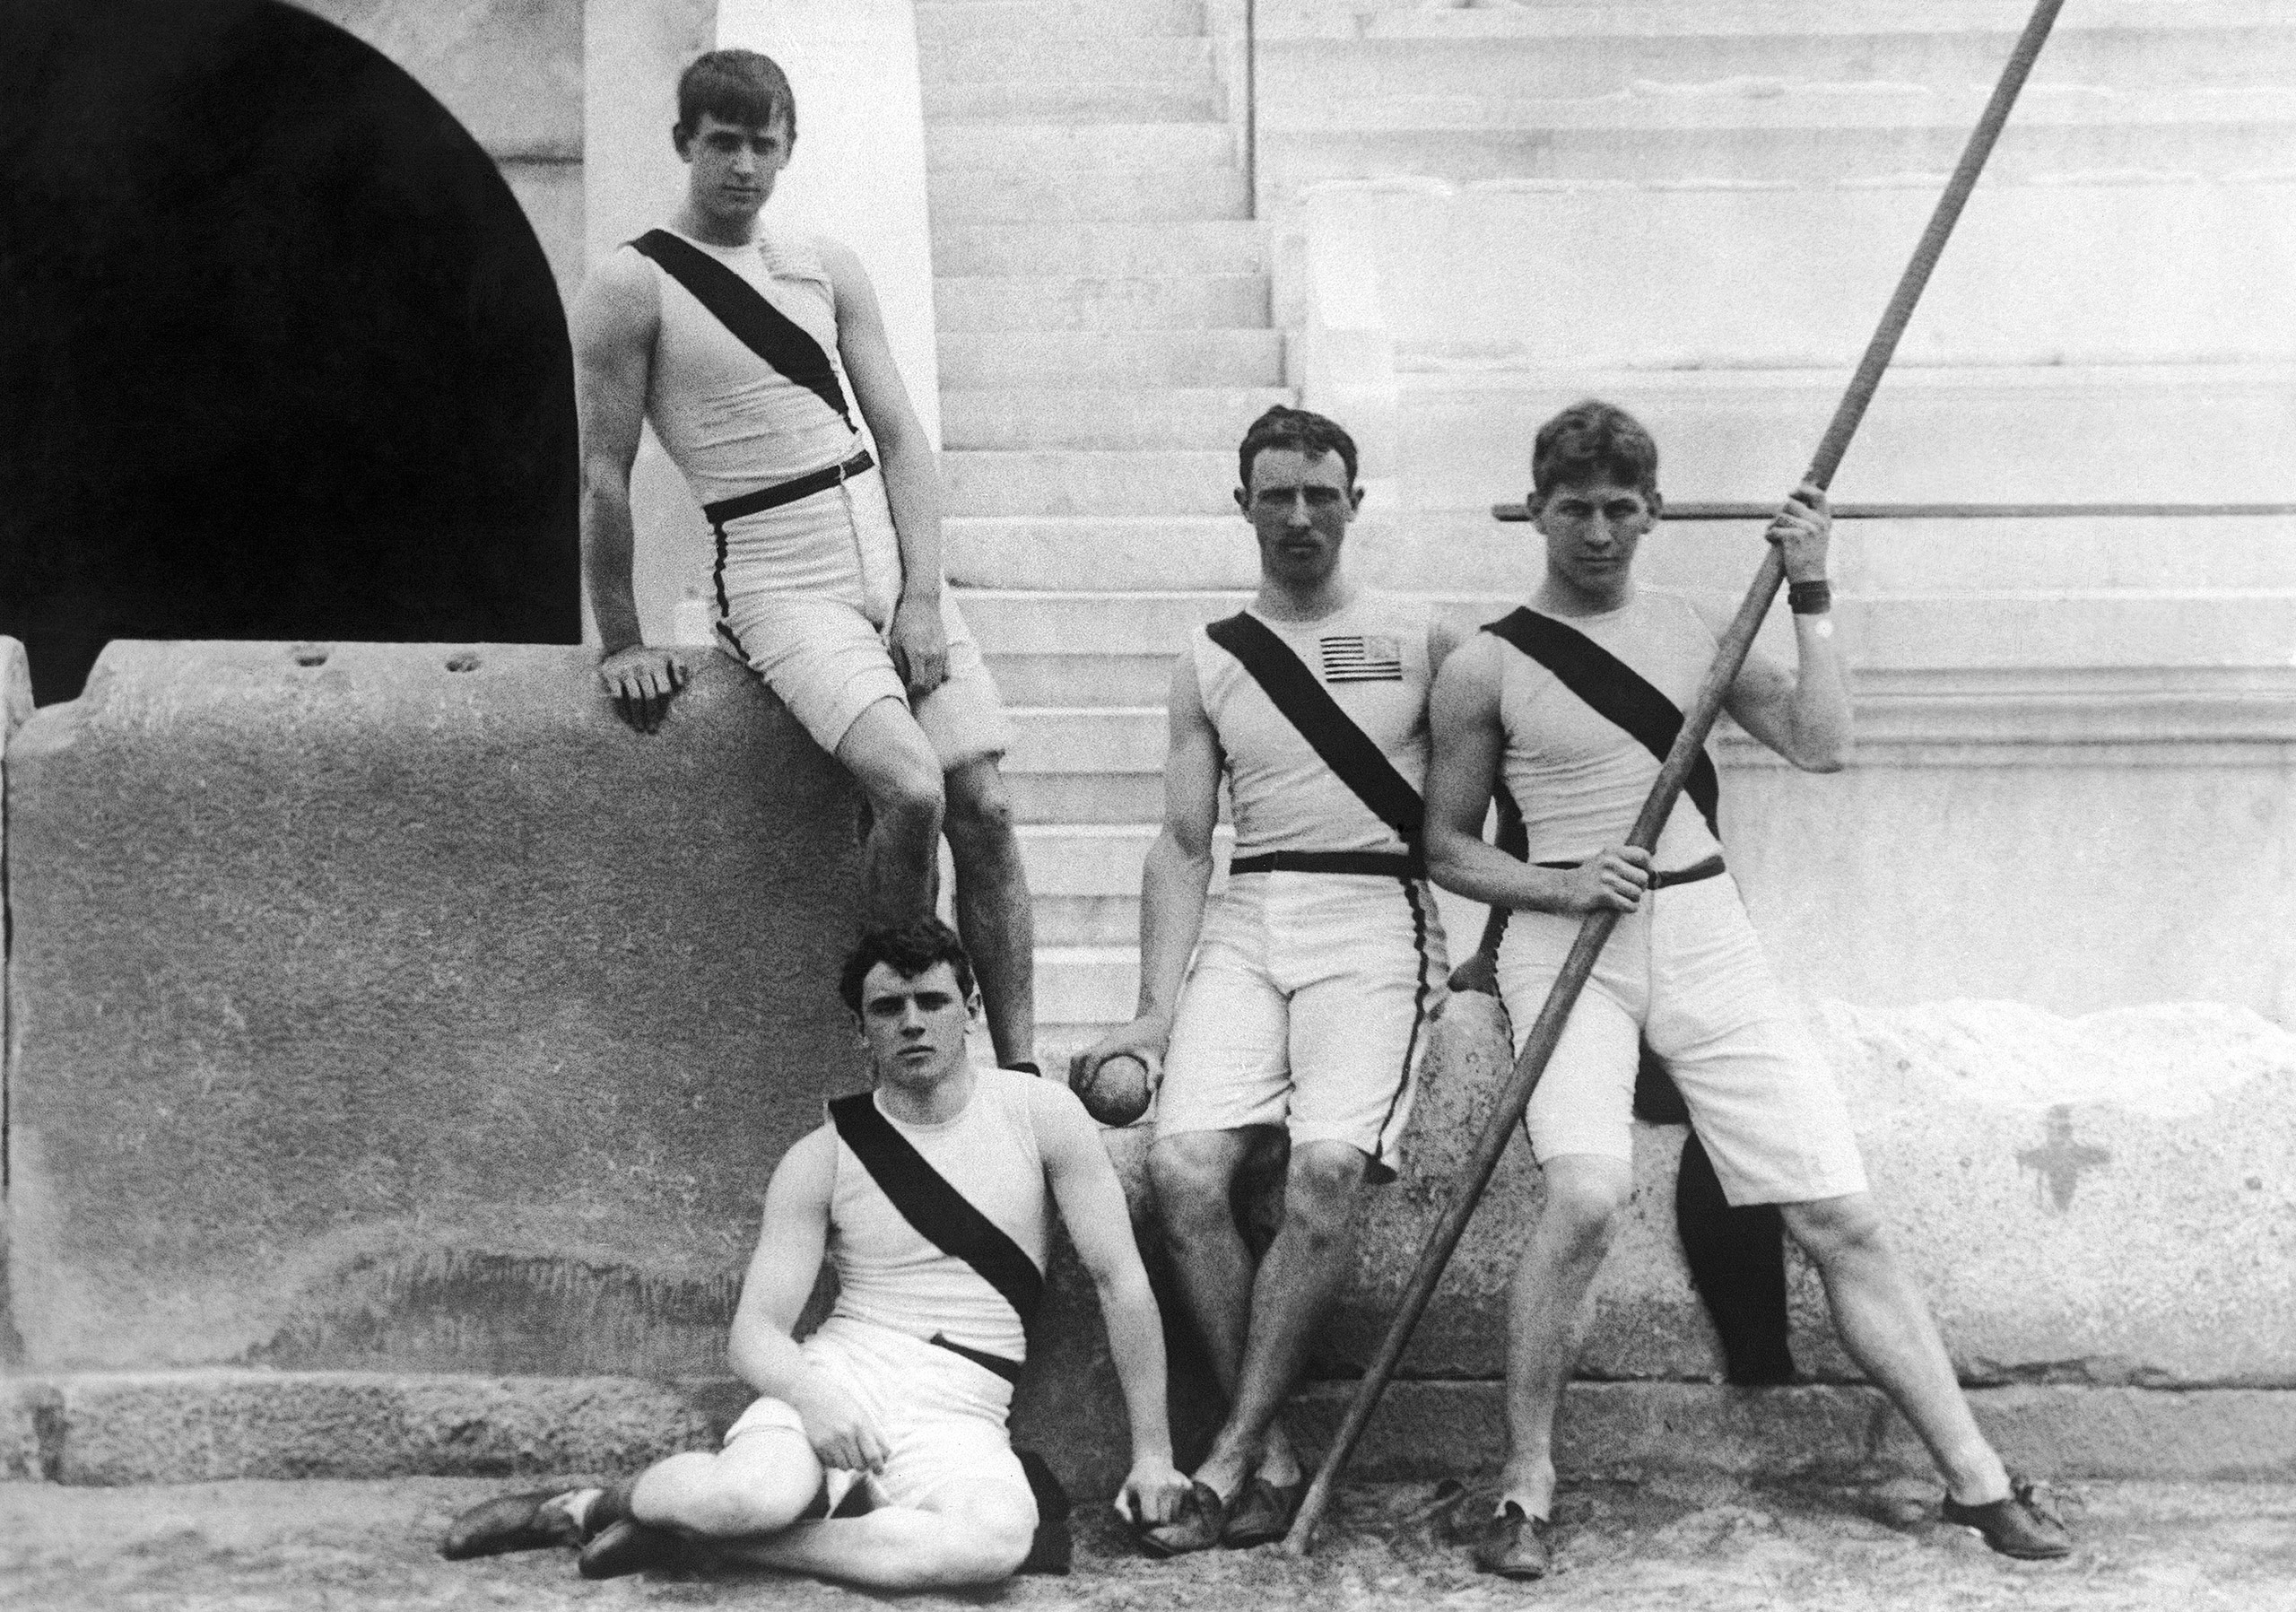 Members of the athletics team of the US Princeton University pose at the first modern International Summer Olympic Games held at the Panathinaiko Stadium in April 1896 in Athens. From left to right: Francis A. Lane, Herbert Jamison, Robert Garrett and Albert Tyler.